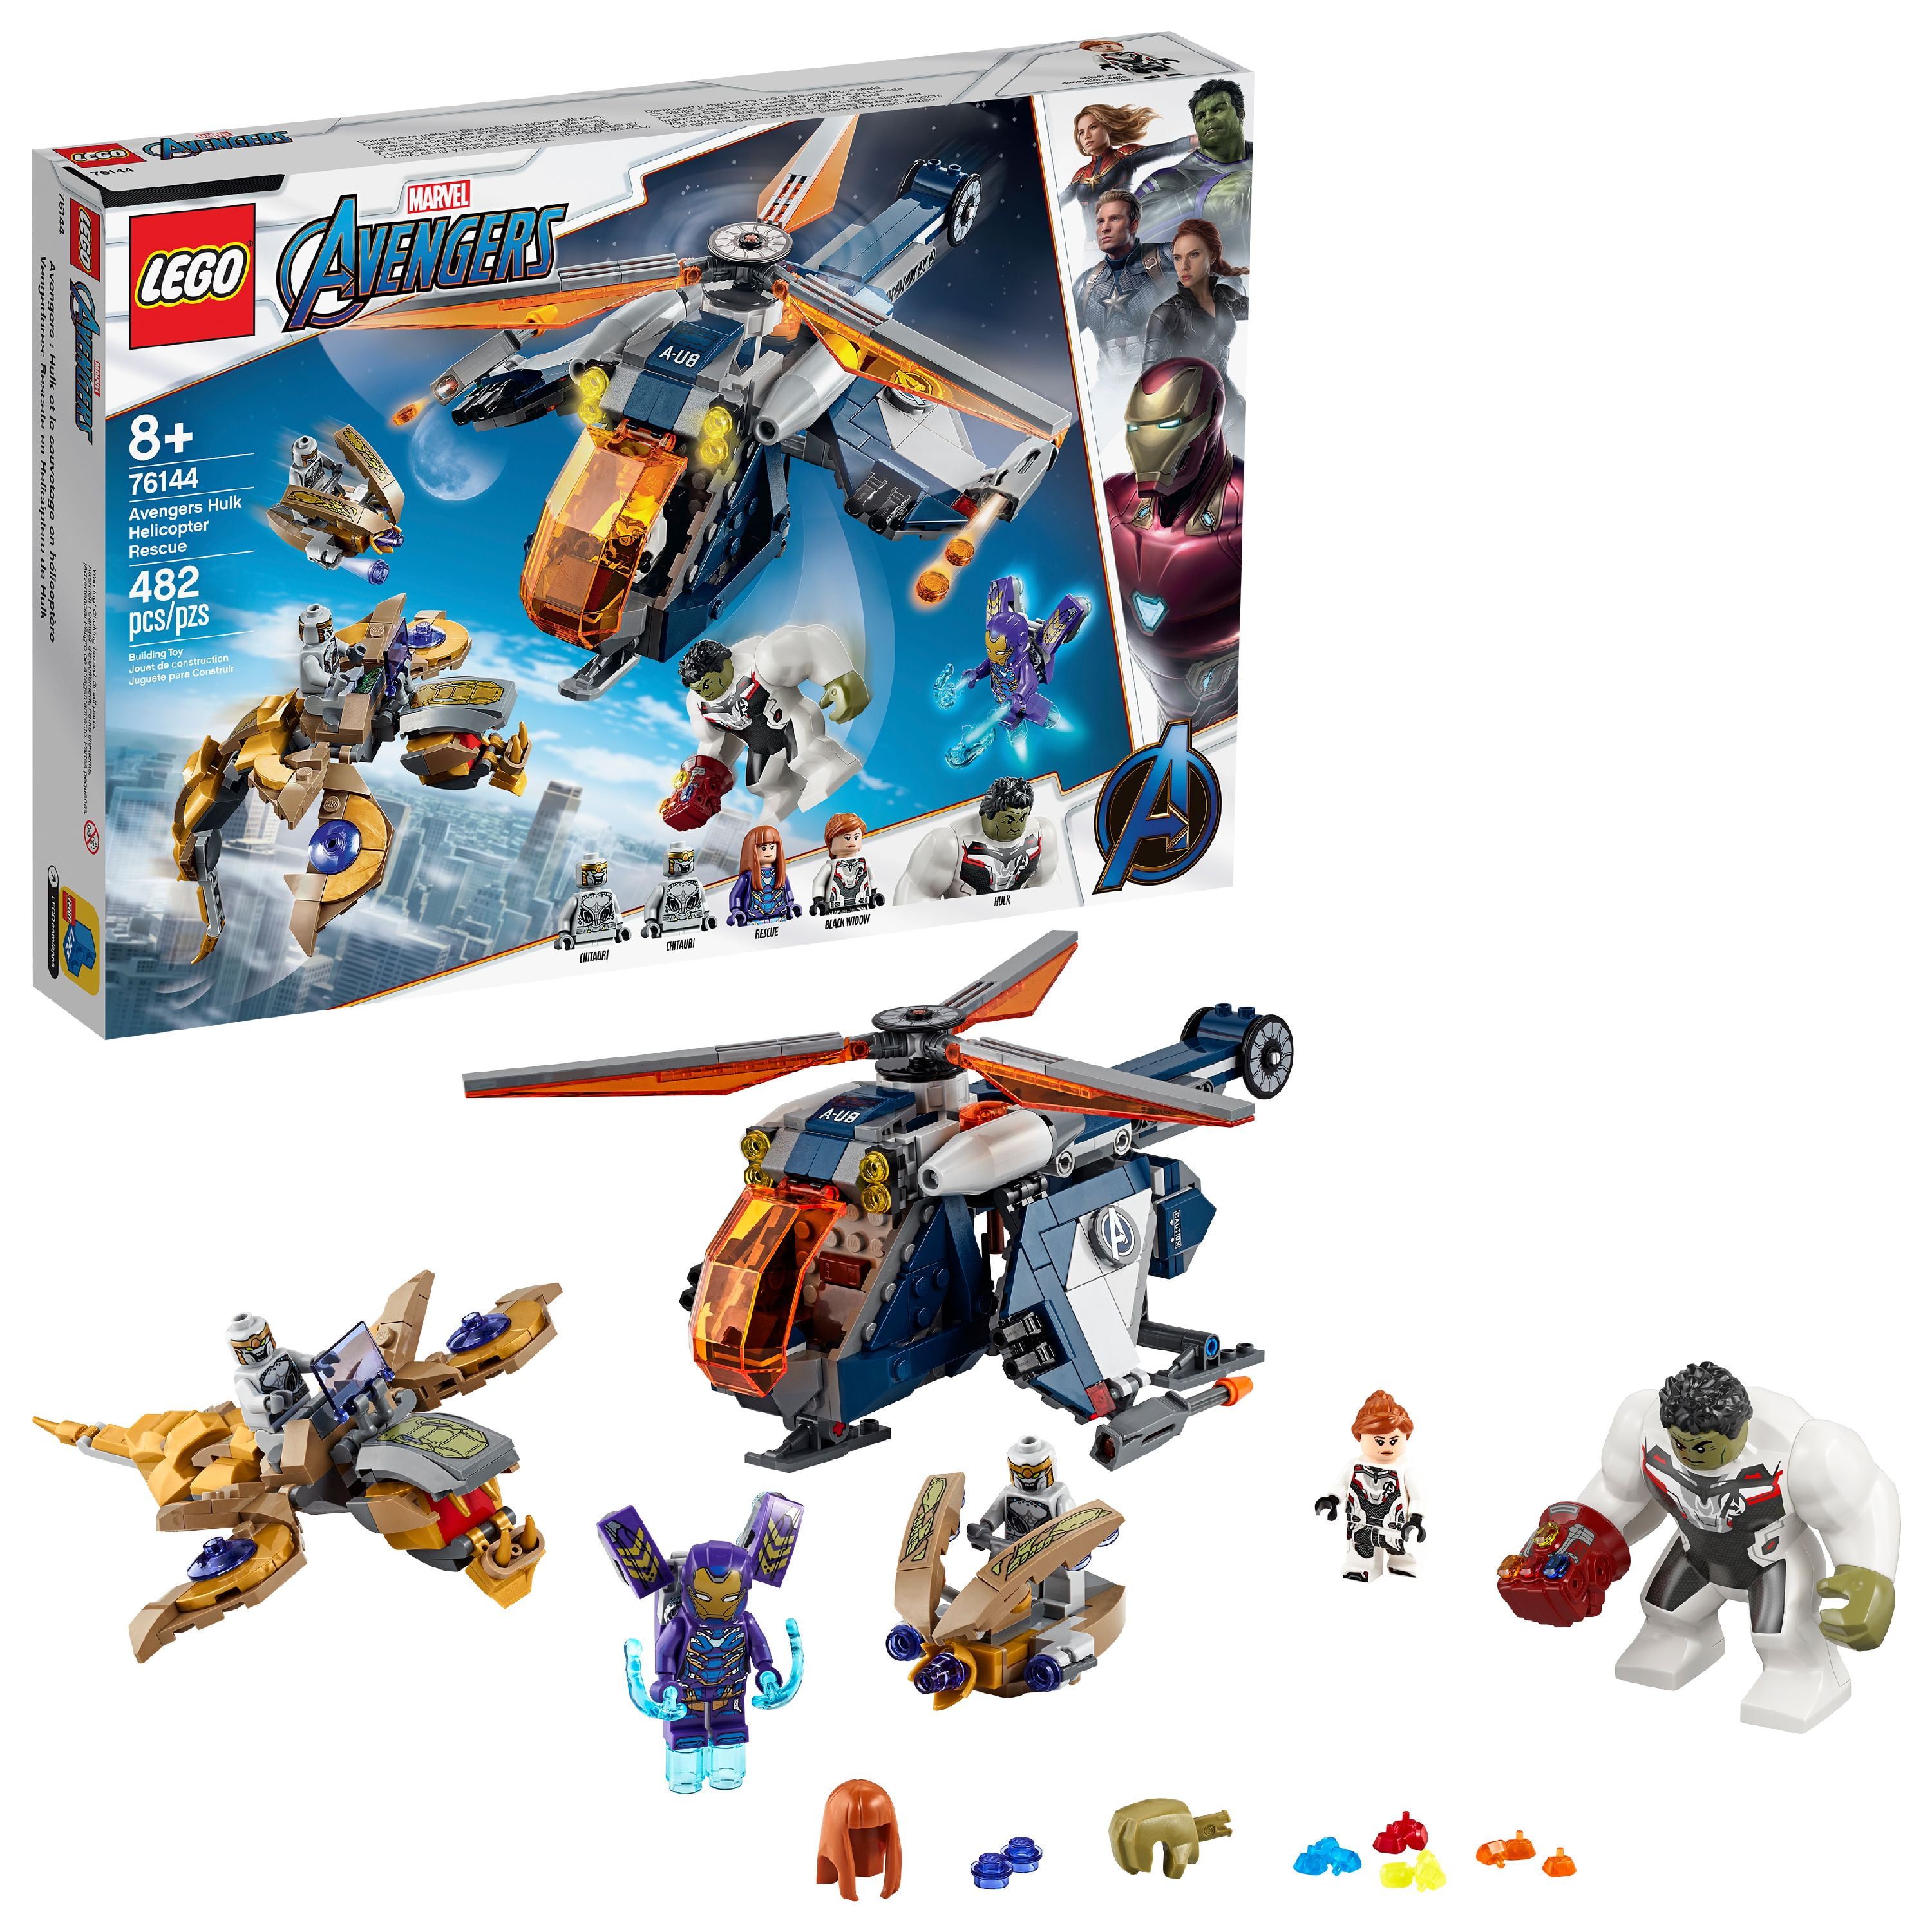 LEGO Super Heroes Avengers Hulk Helicopter Rescue 76144 ...